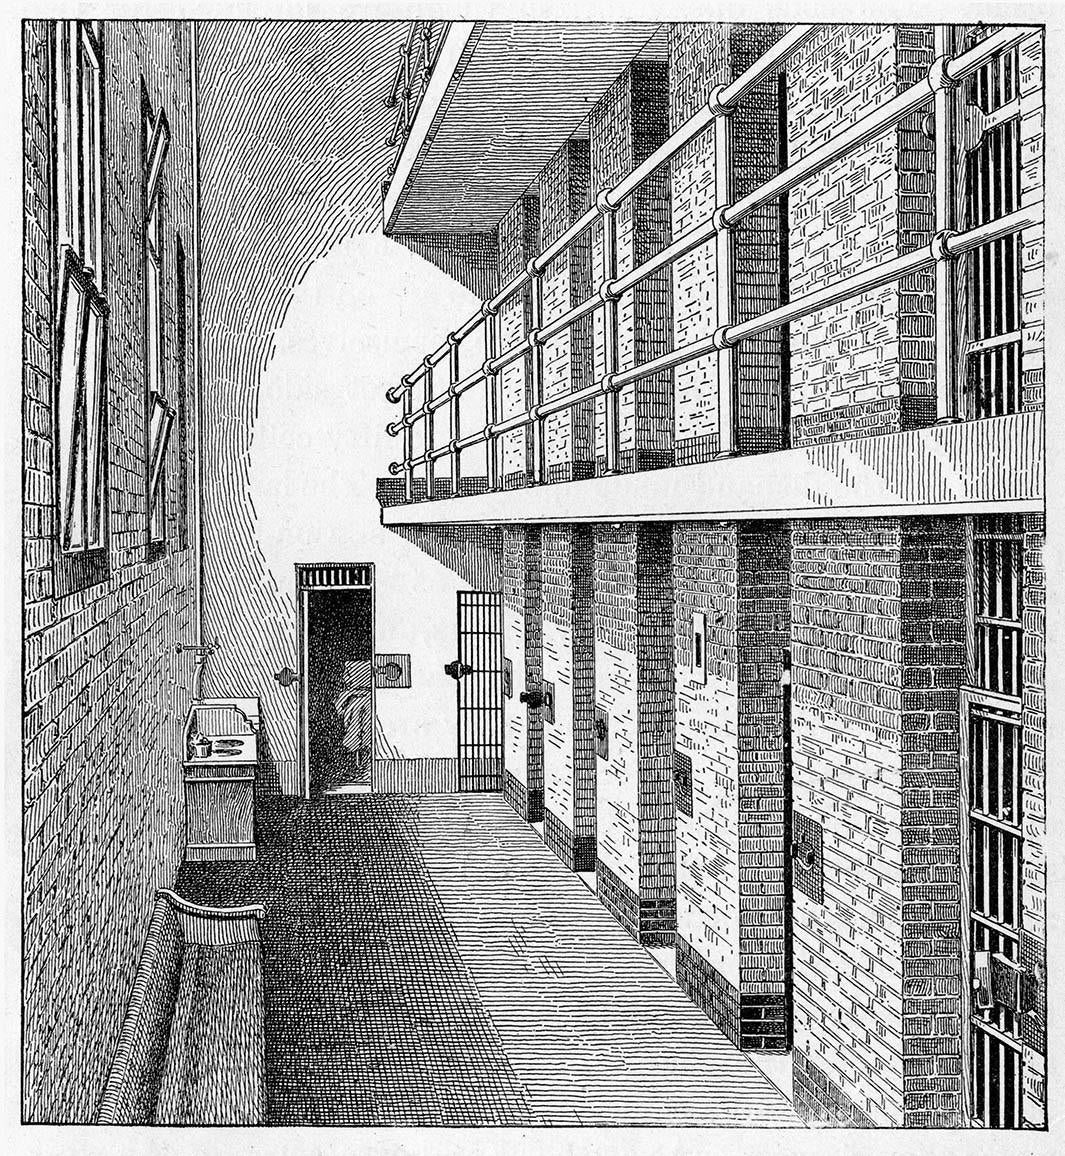 Prison cells for females in The Tombs, New York, late nineteenth century. 